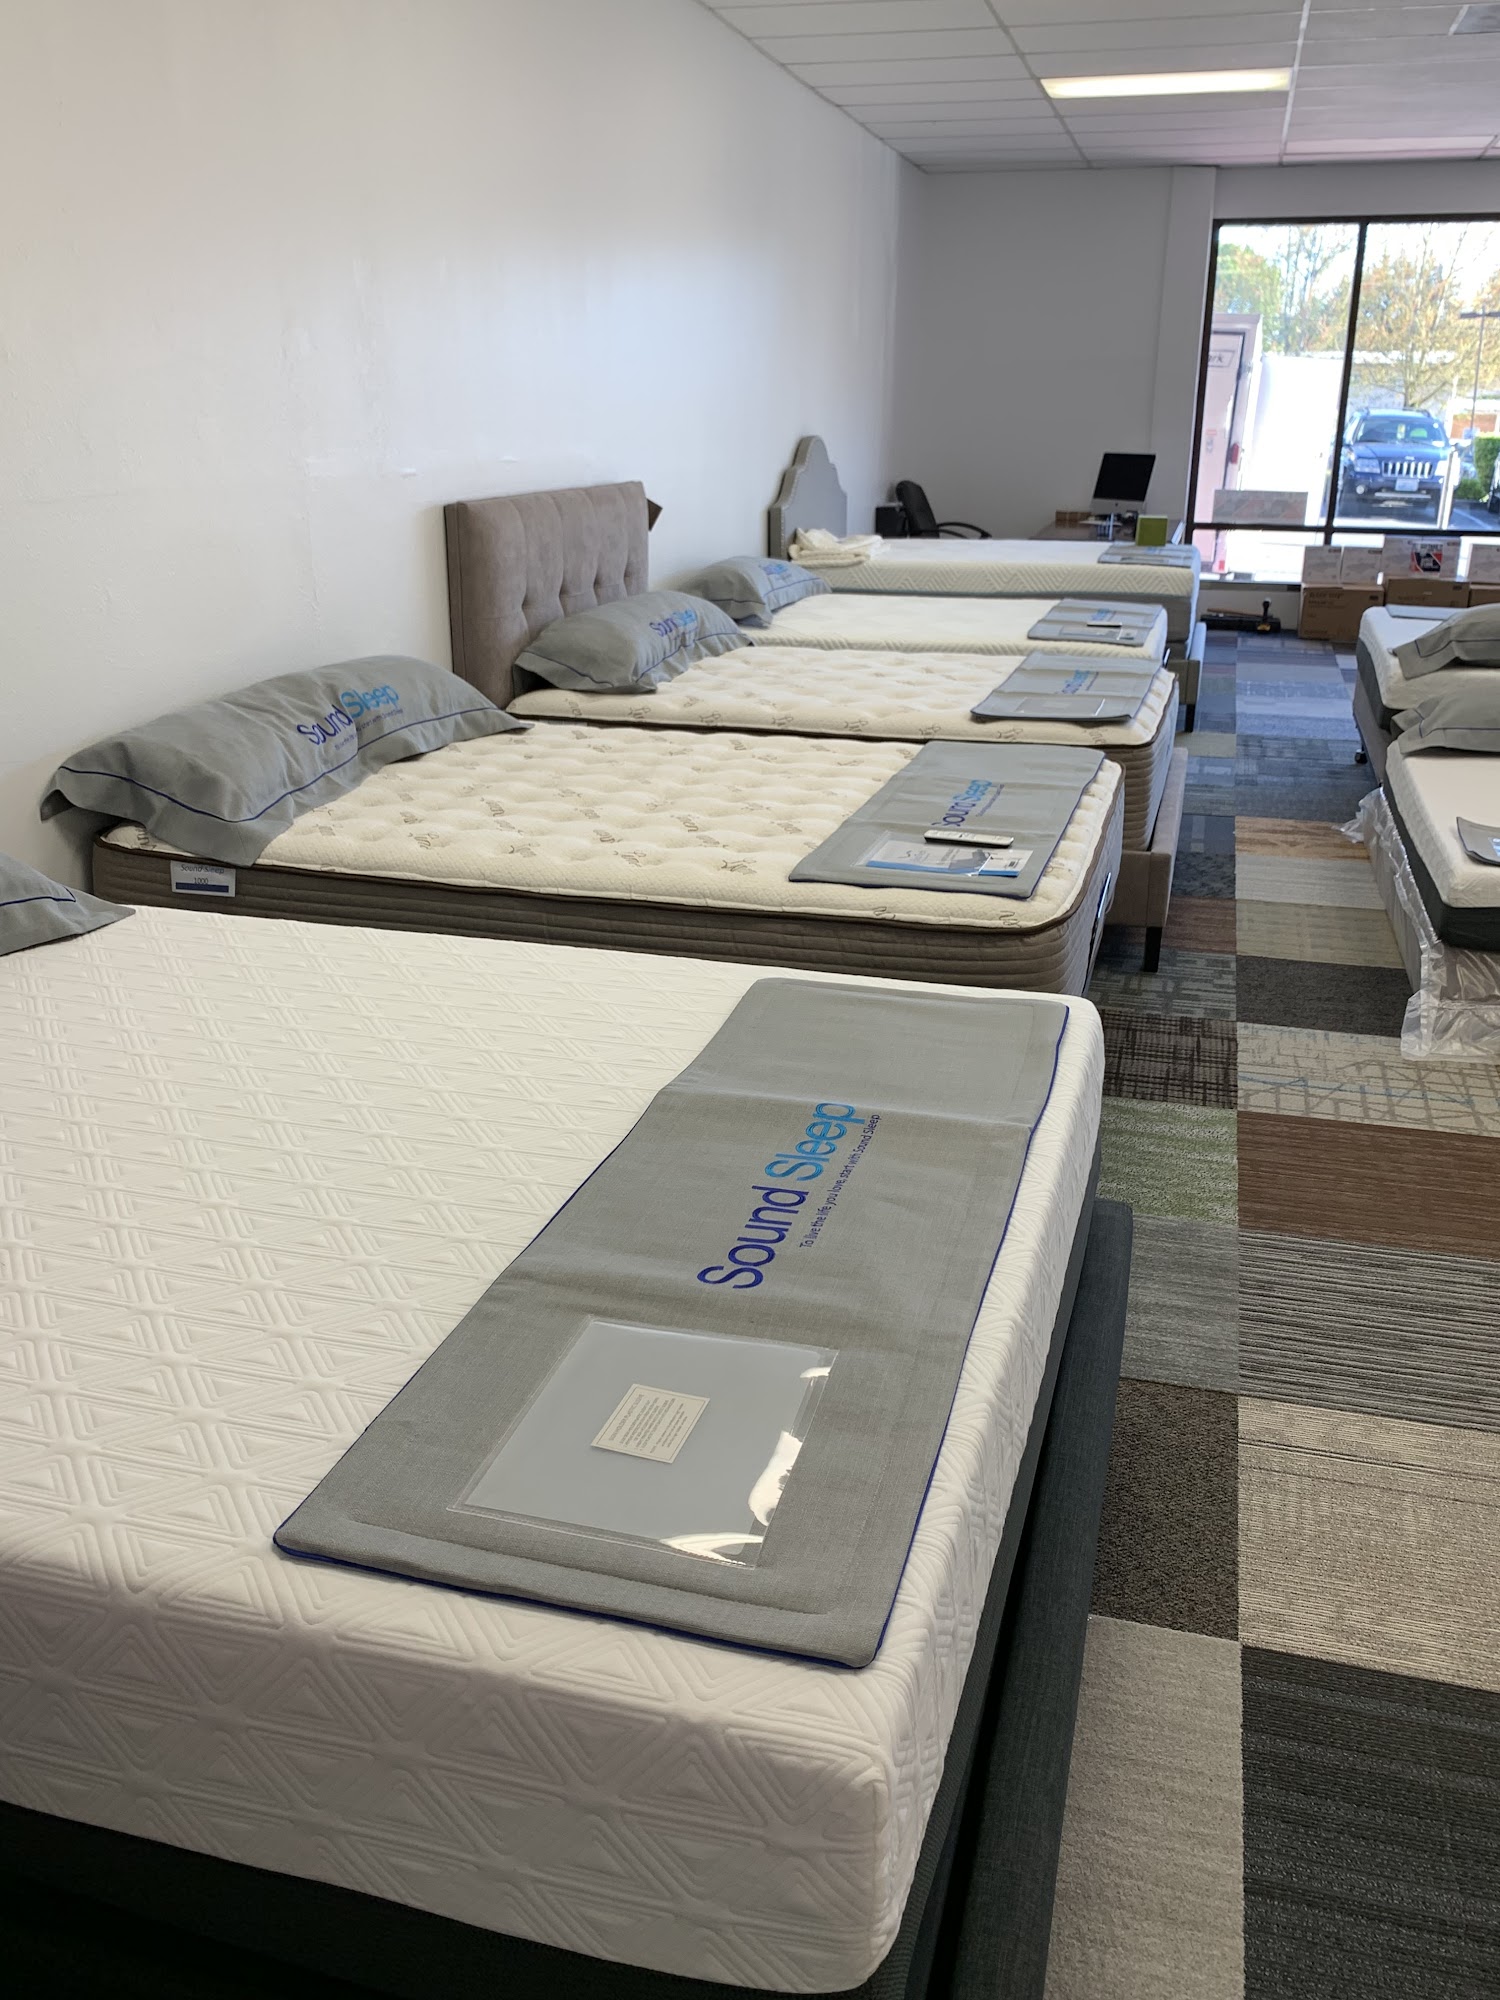 One Sleep Company, Mattress Sales By Appointment